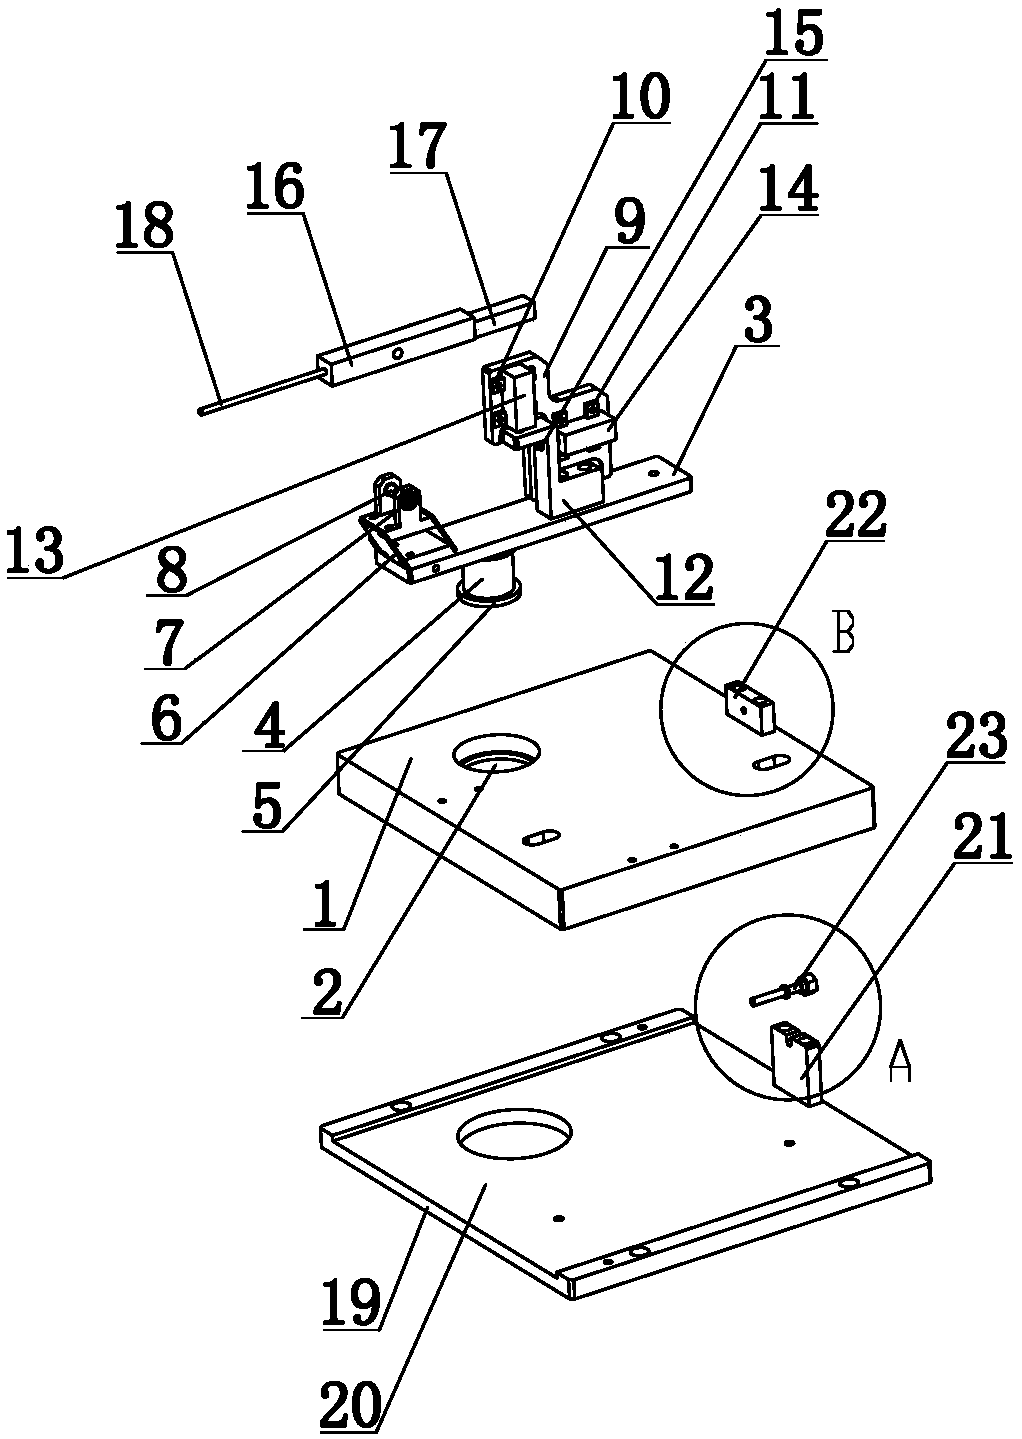 Grading device used for metal surface paint sprayer